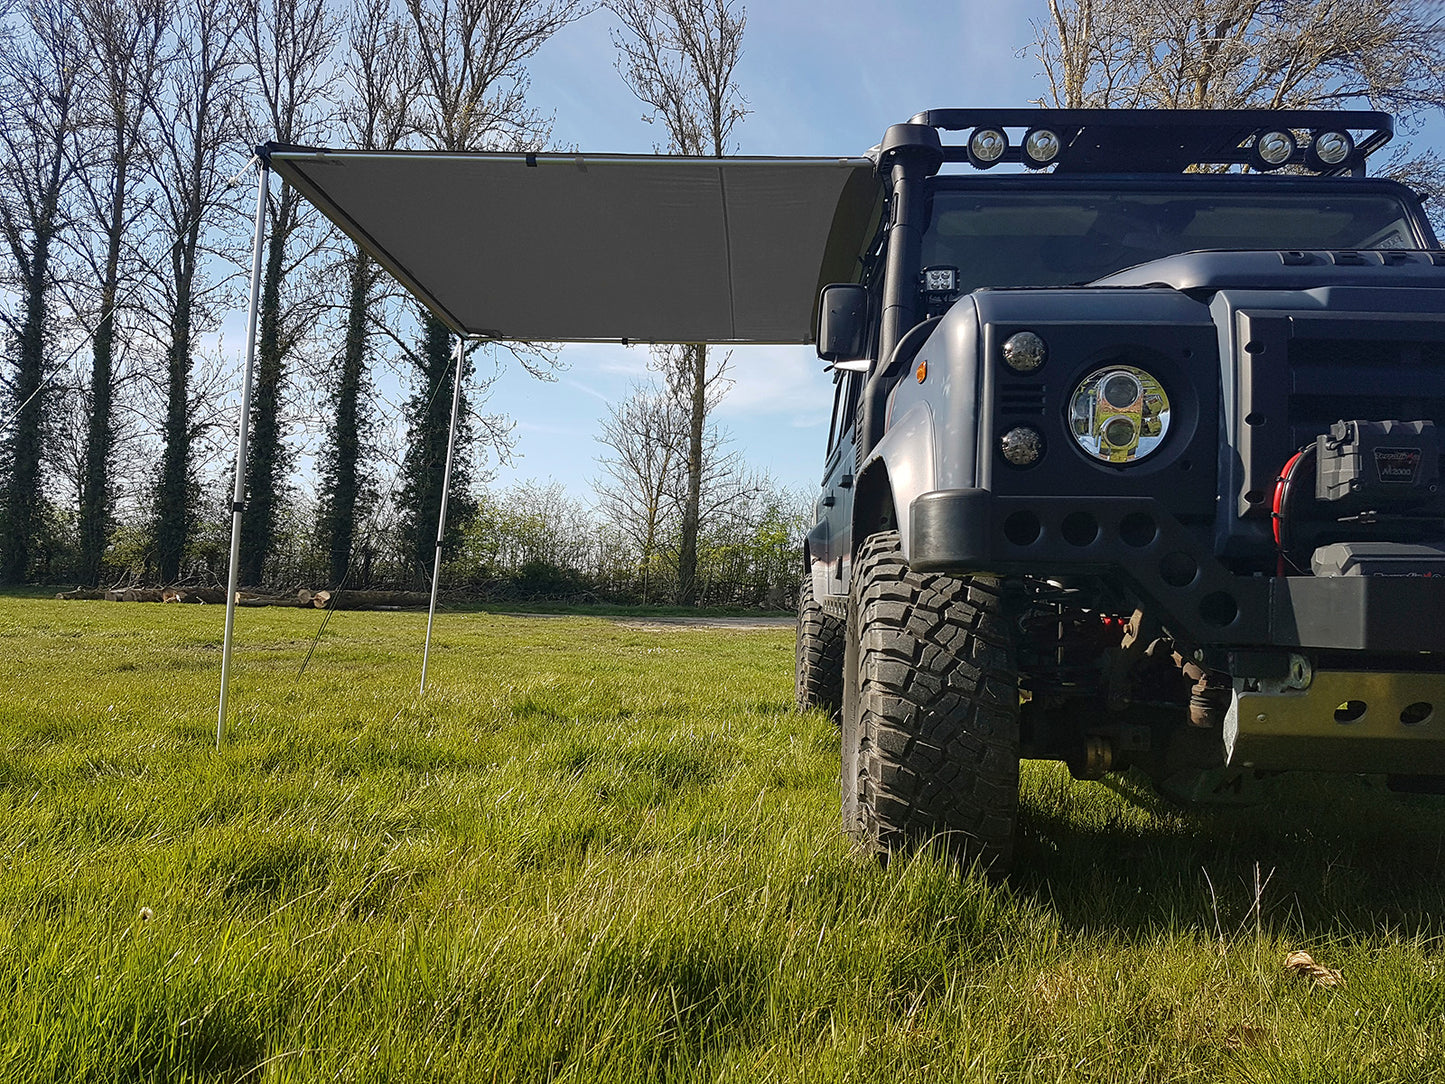 TF1700 2.5M EXPEDITION AWNING - UNIVERSAL